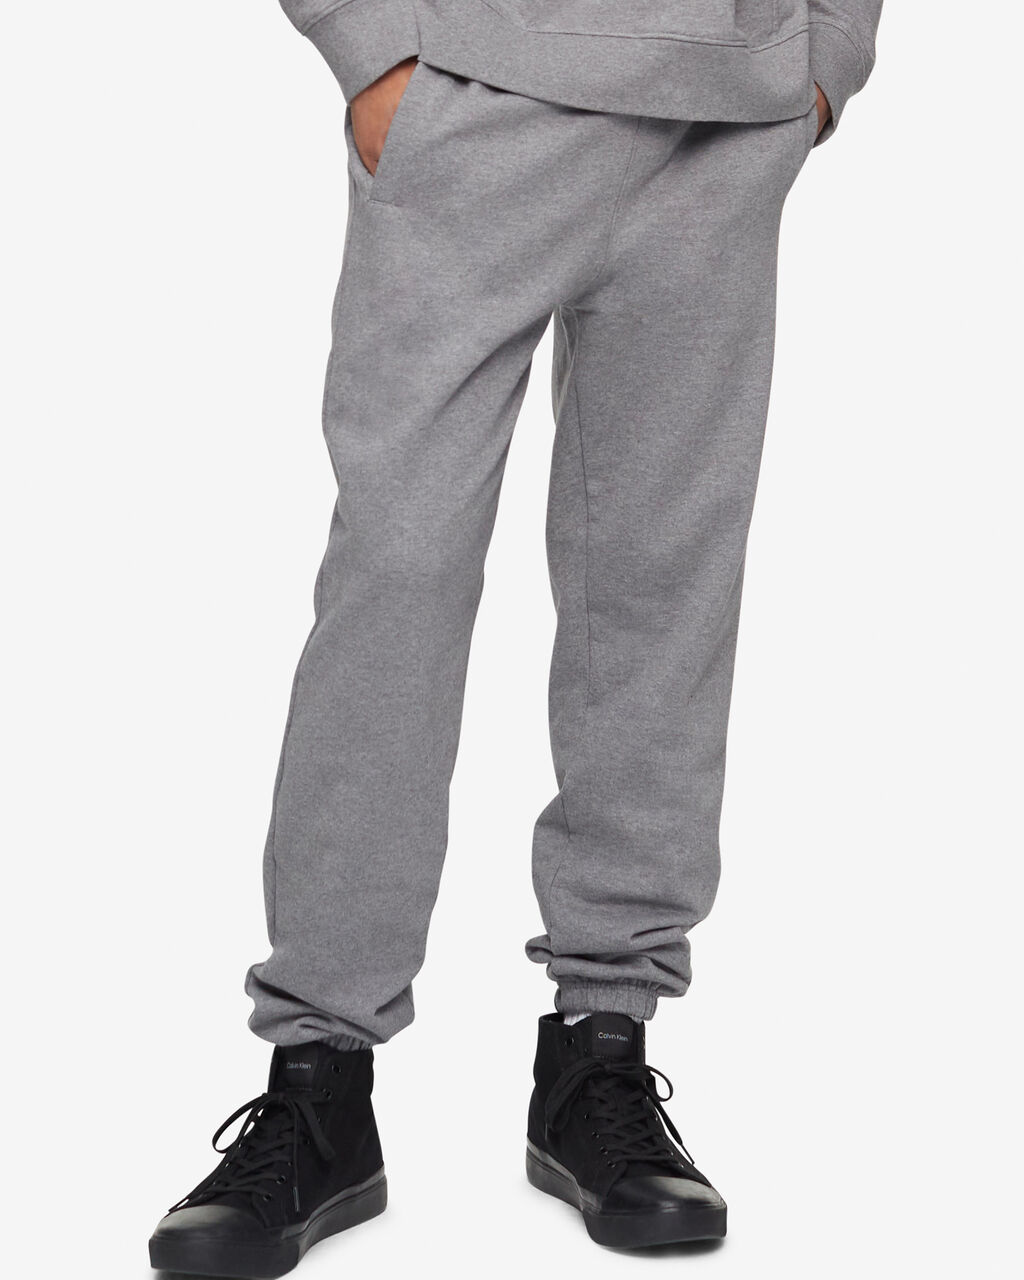 Better Bodies -Graphic Standard Pants - straight fit with semi loose look.